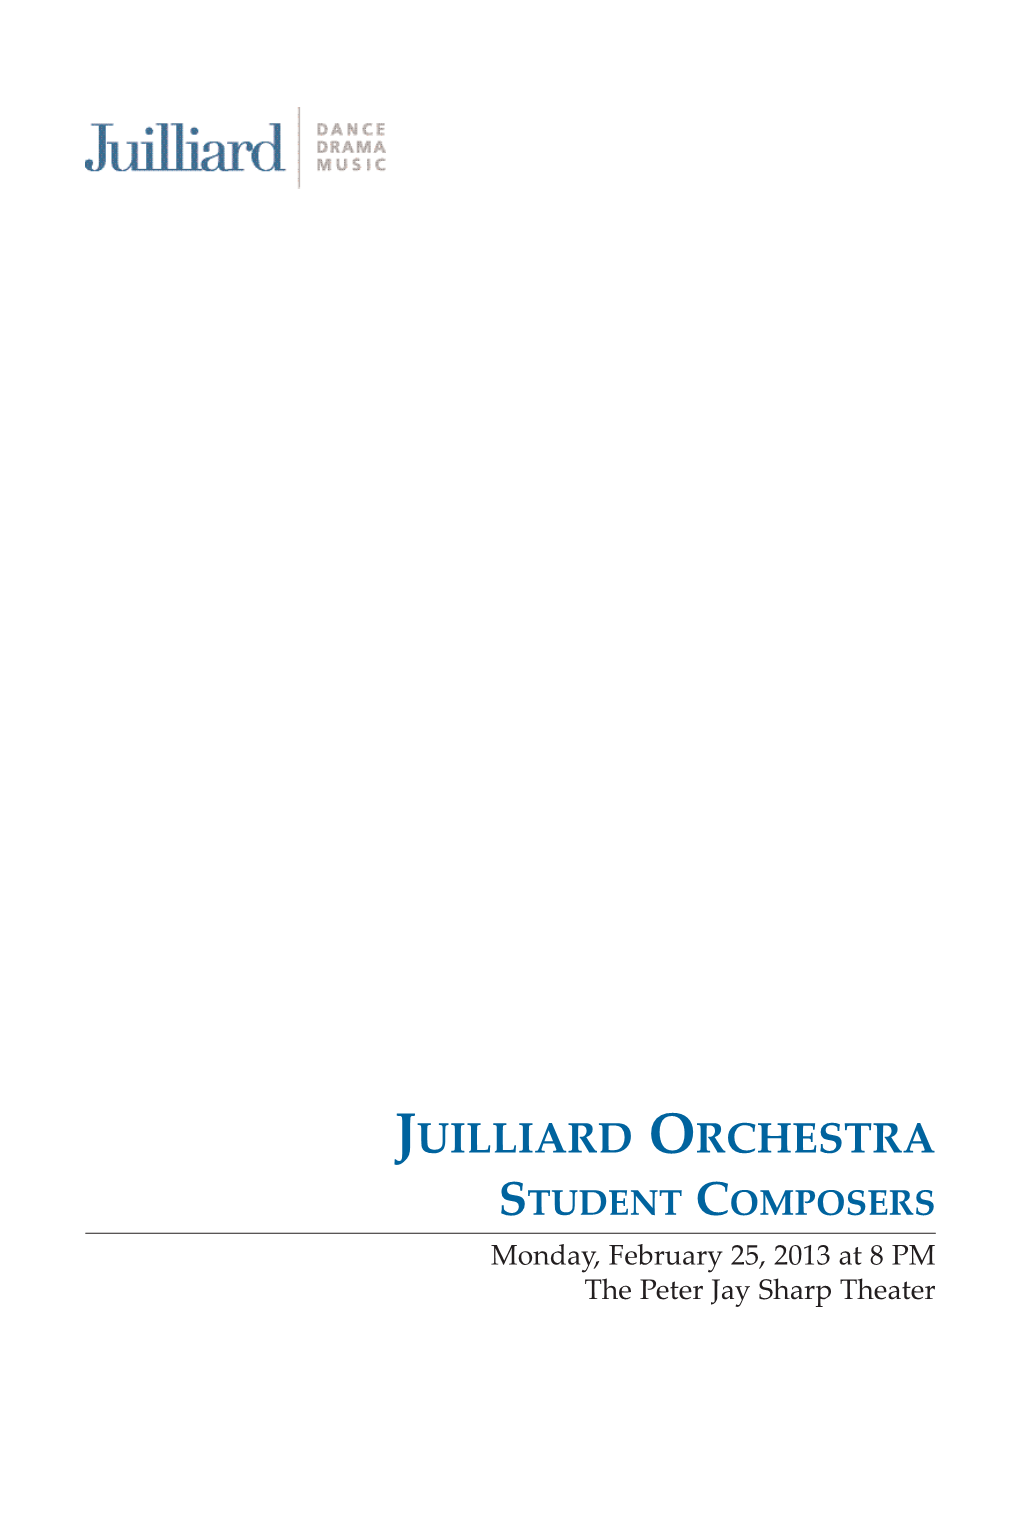 Juilliard Orchestra Student Composers Monday, February 25, 2013 at 8 PM the Peter Jay Sharp Theater Printed on Recycled Paper the Juilliard School Presents The